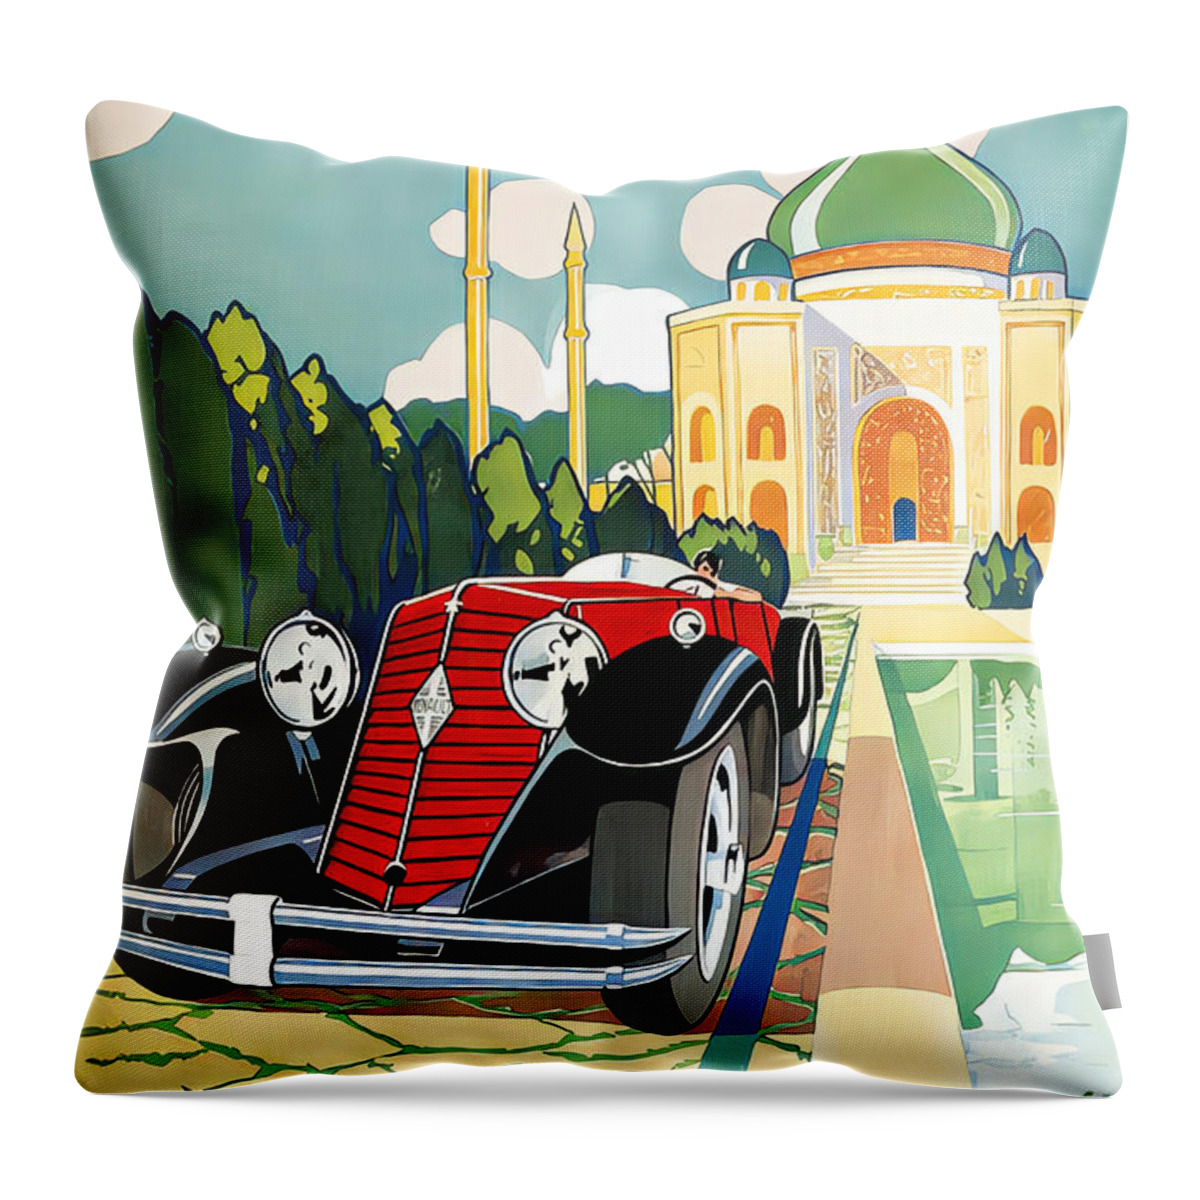 Vintage Throw Pillow featuring the mixed media 1930 Renault Sports Skiff Touring Car Eastern Poolside Setting Original French Art Deco Illustration by Retrographs